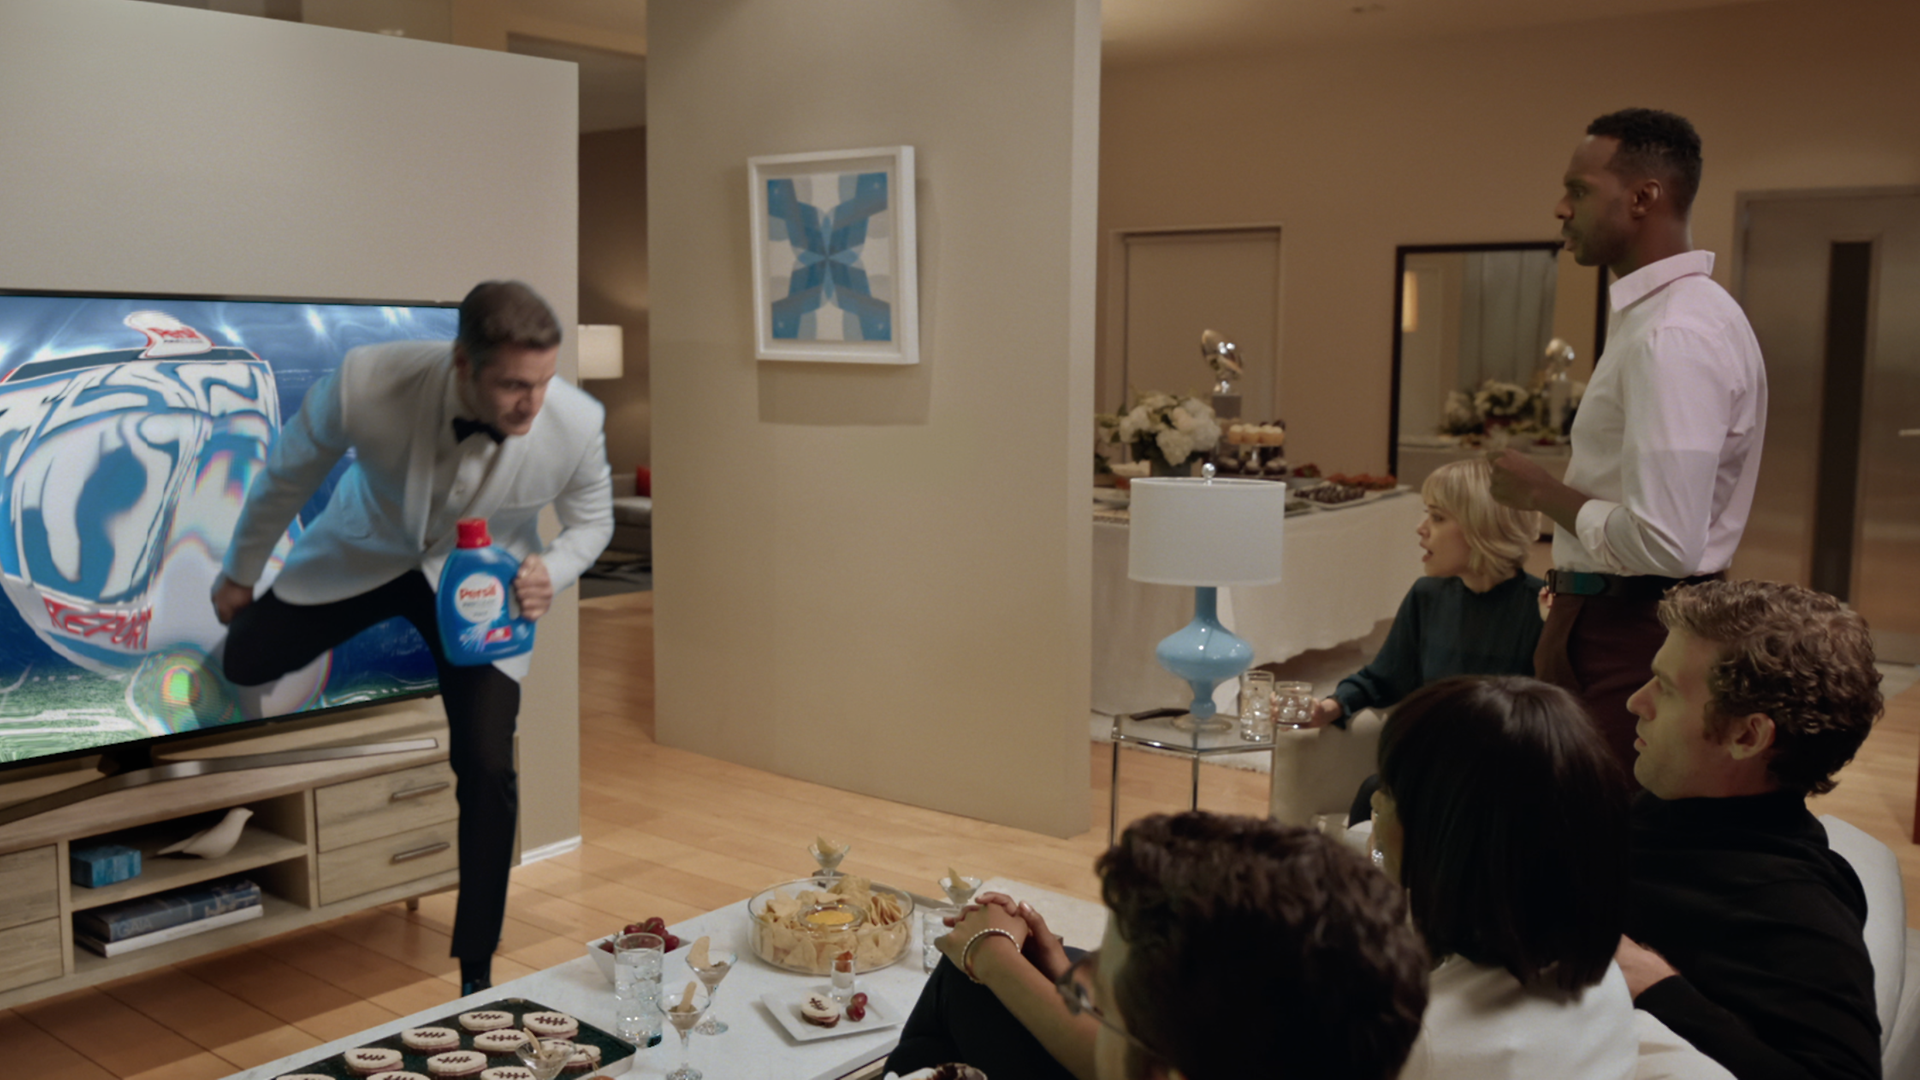 
For the third time in a row Henkel has a TV-Spot at the Super Bowl LII® with its premium detergent Persil ProClean.